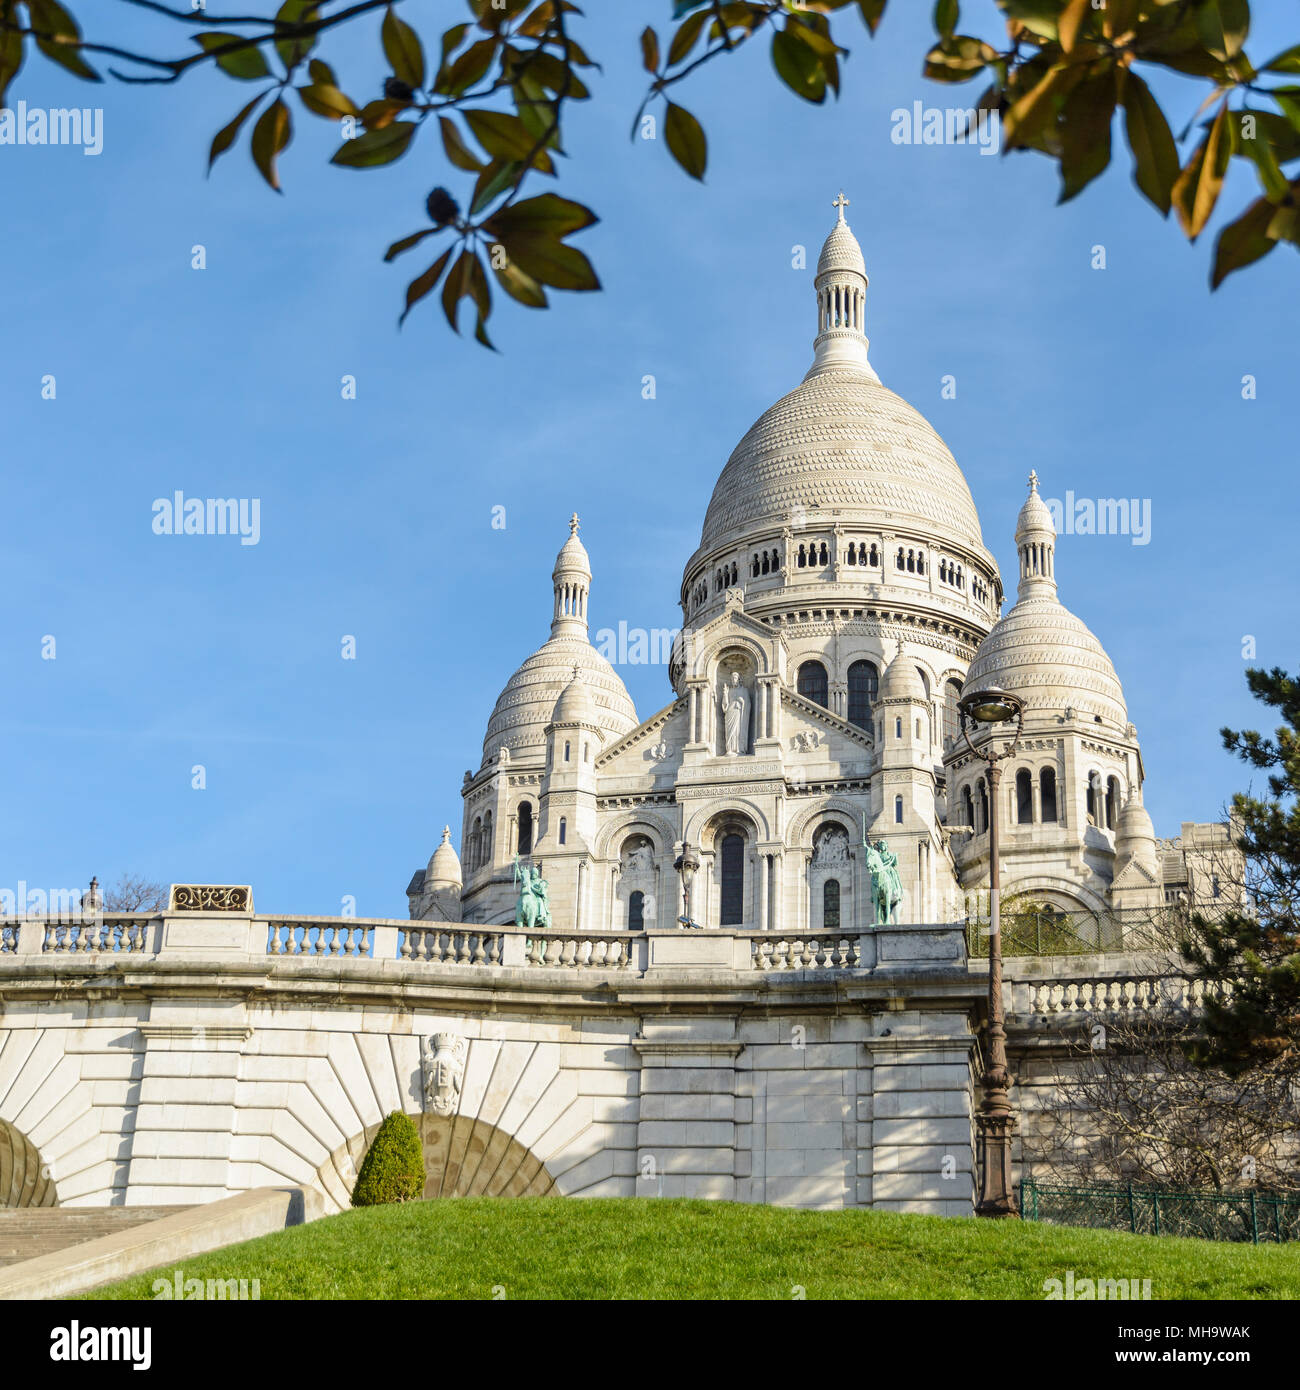 The basilica of the Sacred Heart of Paris at the top of the Montmartre hill seen from the Louise Michel park with foliage in the foreground. Stock Photo